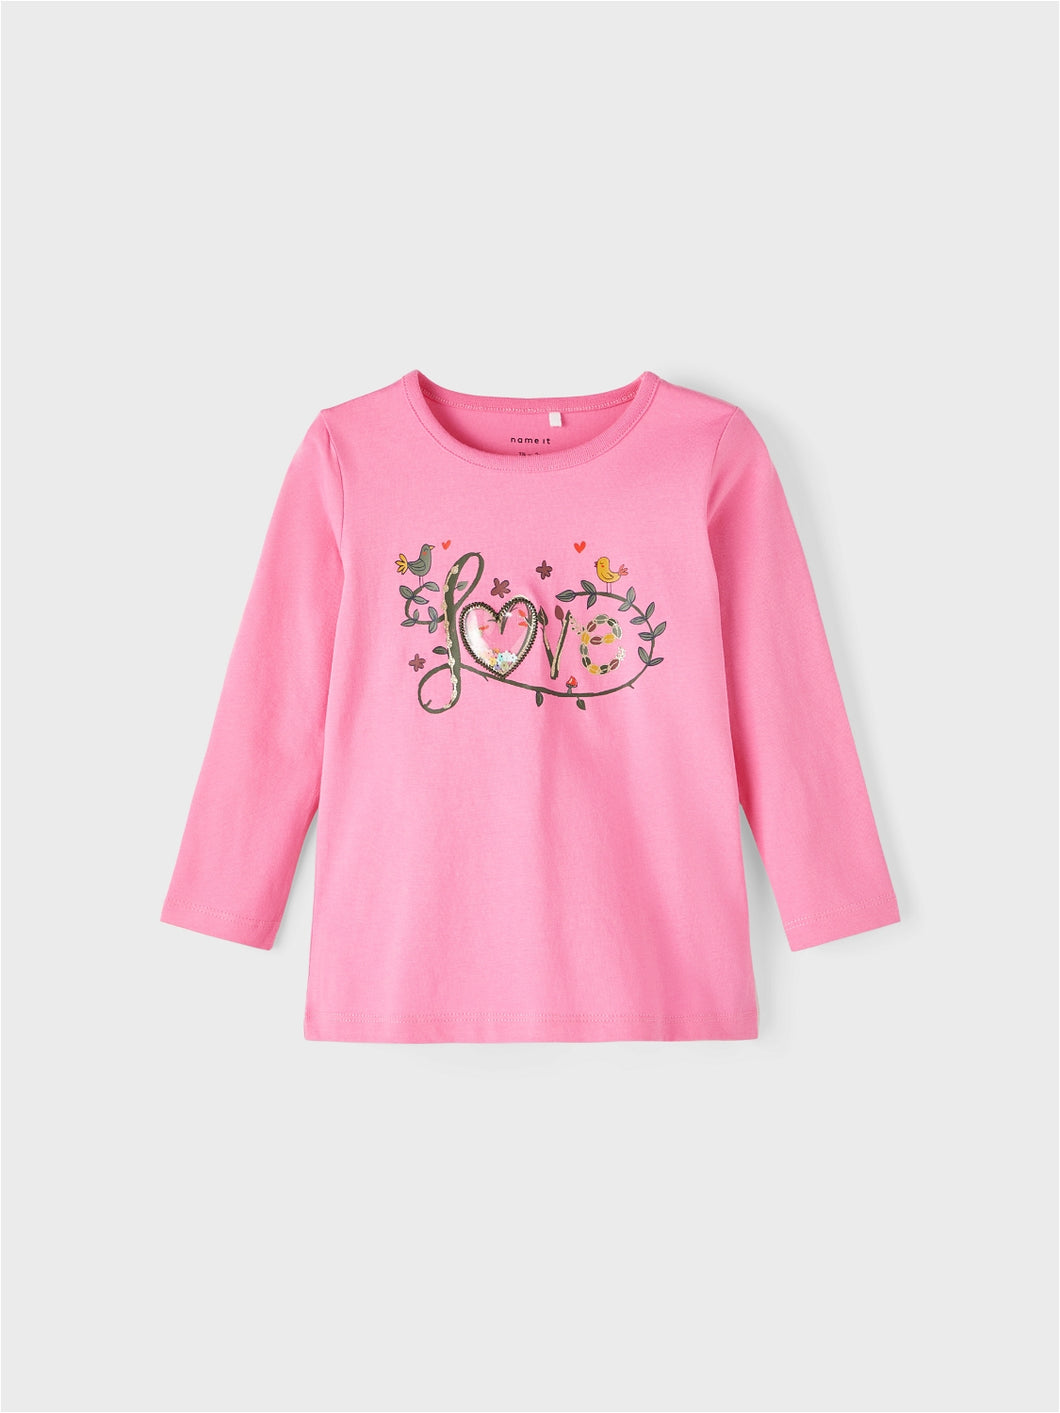 NMFOLYMPIA T-Shirts & Tops - Pink Cosmos